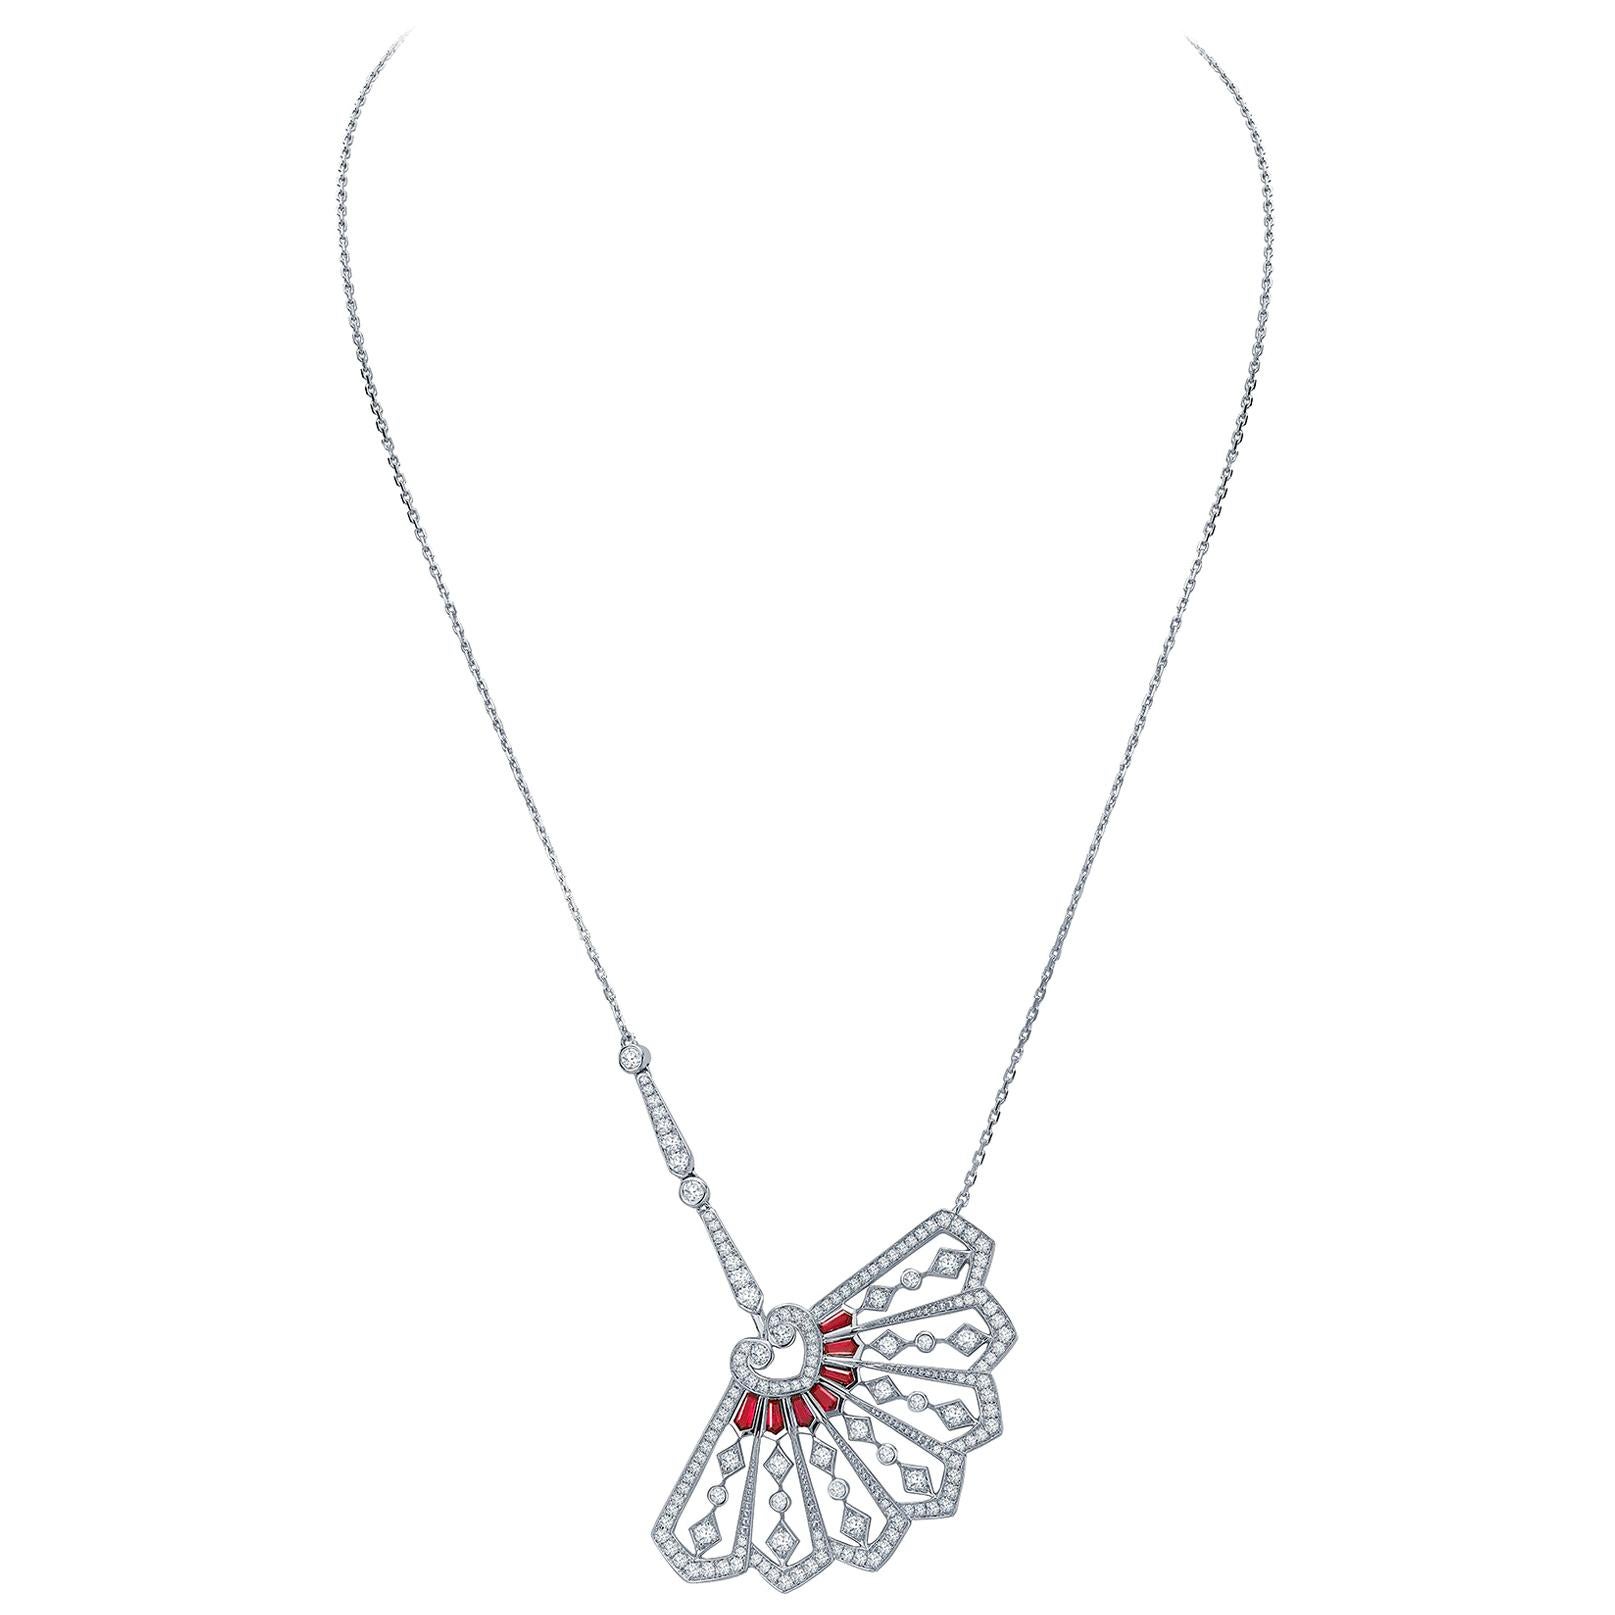 Garrard 'Fanfare' White Gold Pendant with White Diamond and Calibre Cut Rubies For Sale